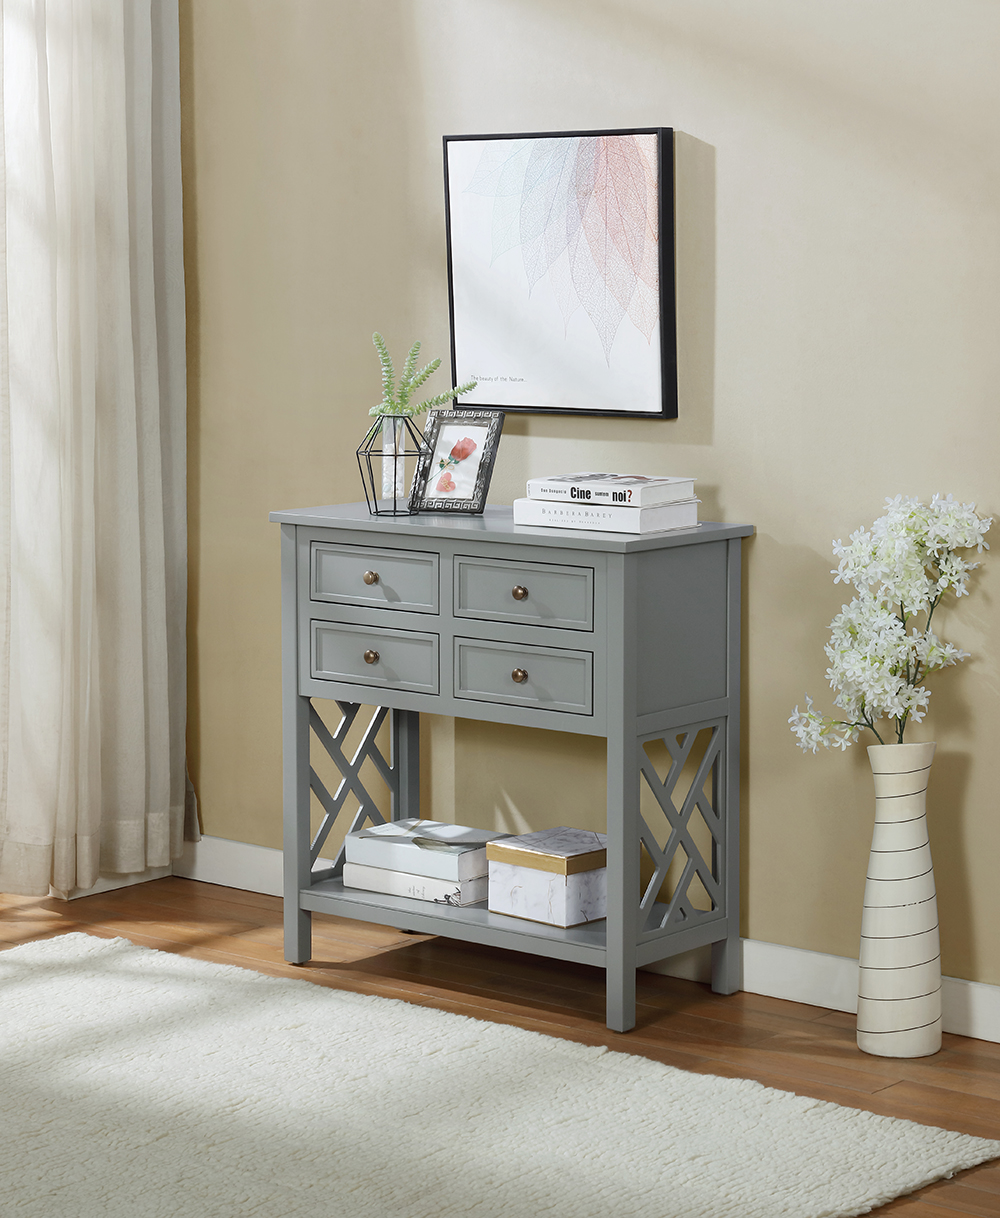 Coventry 32" Wooden Console Table with 4 Storage Drawers, and Bottom Shelf, for Entrance, Hallway, Dining Room, Kitchen - Gray